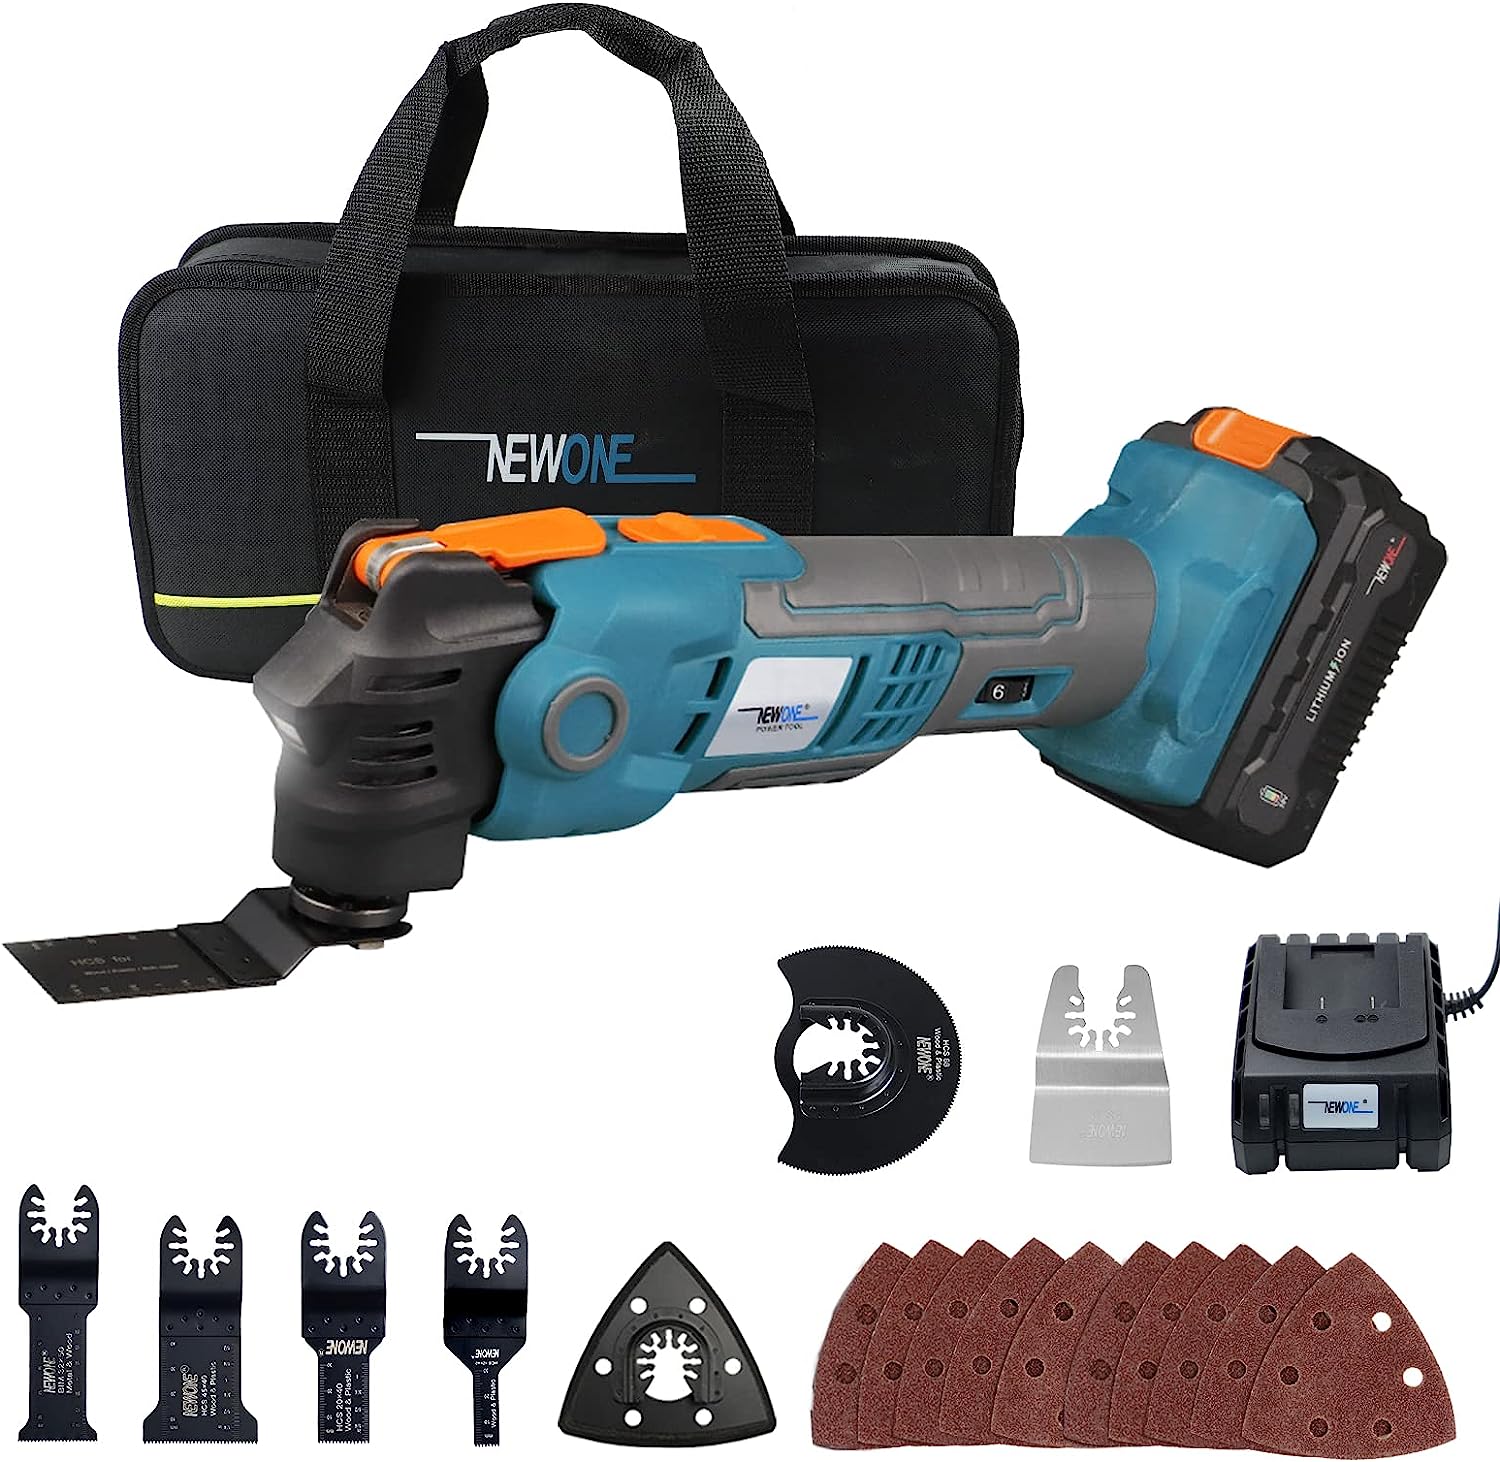 NEWONE 20V Oscillating Tool Kit,Max Quick-release [...]